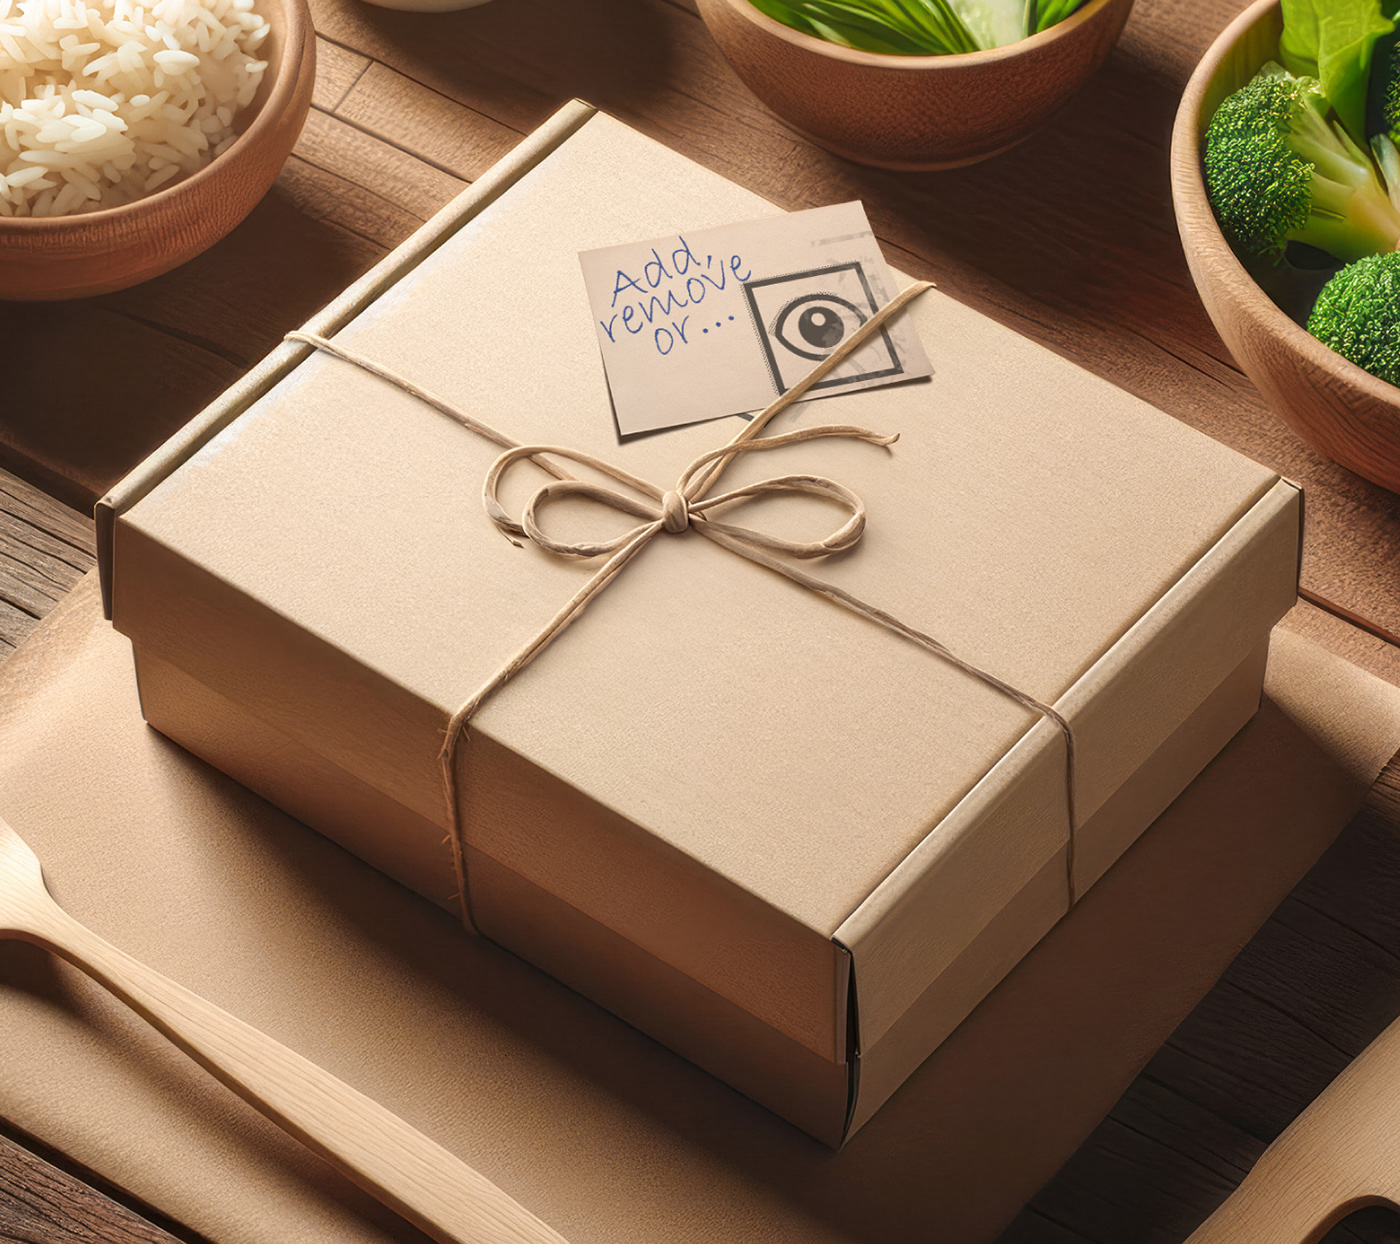 paper lunch box free organic Mockup psd photoshop template Health